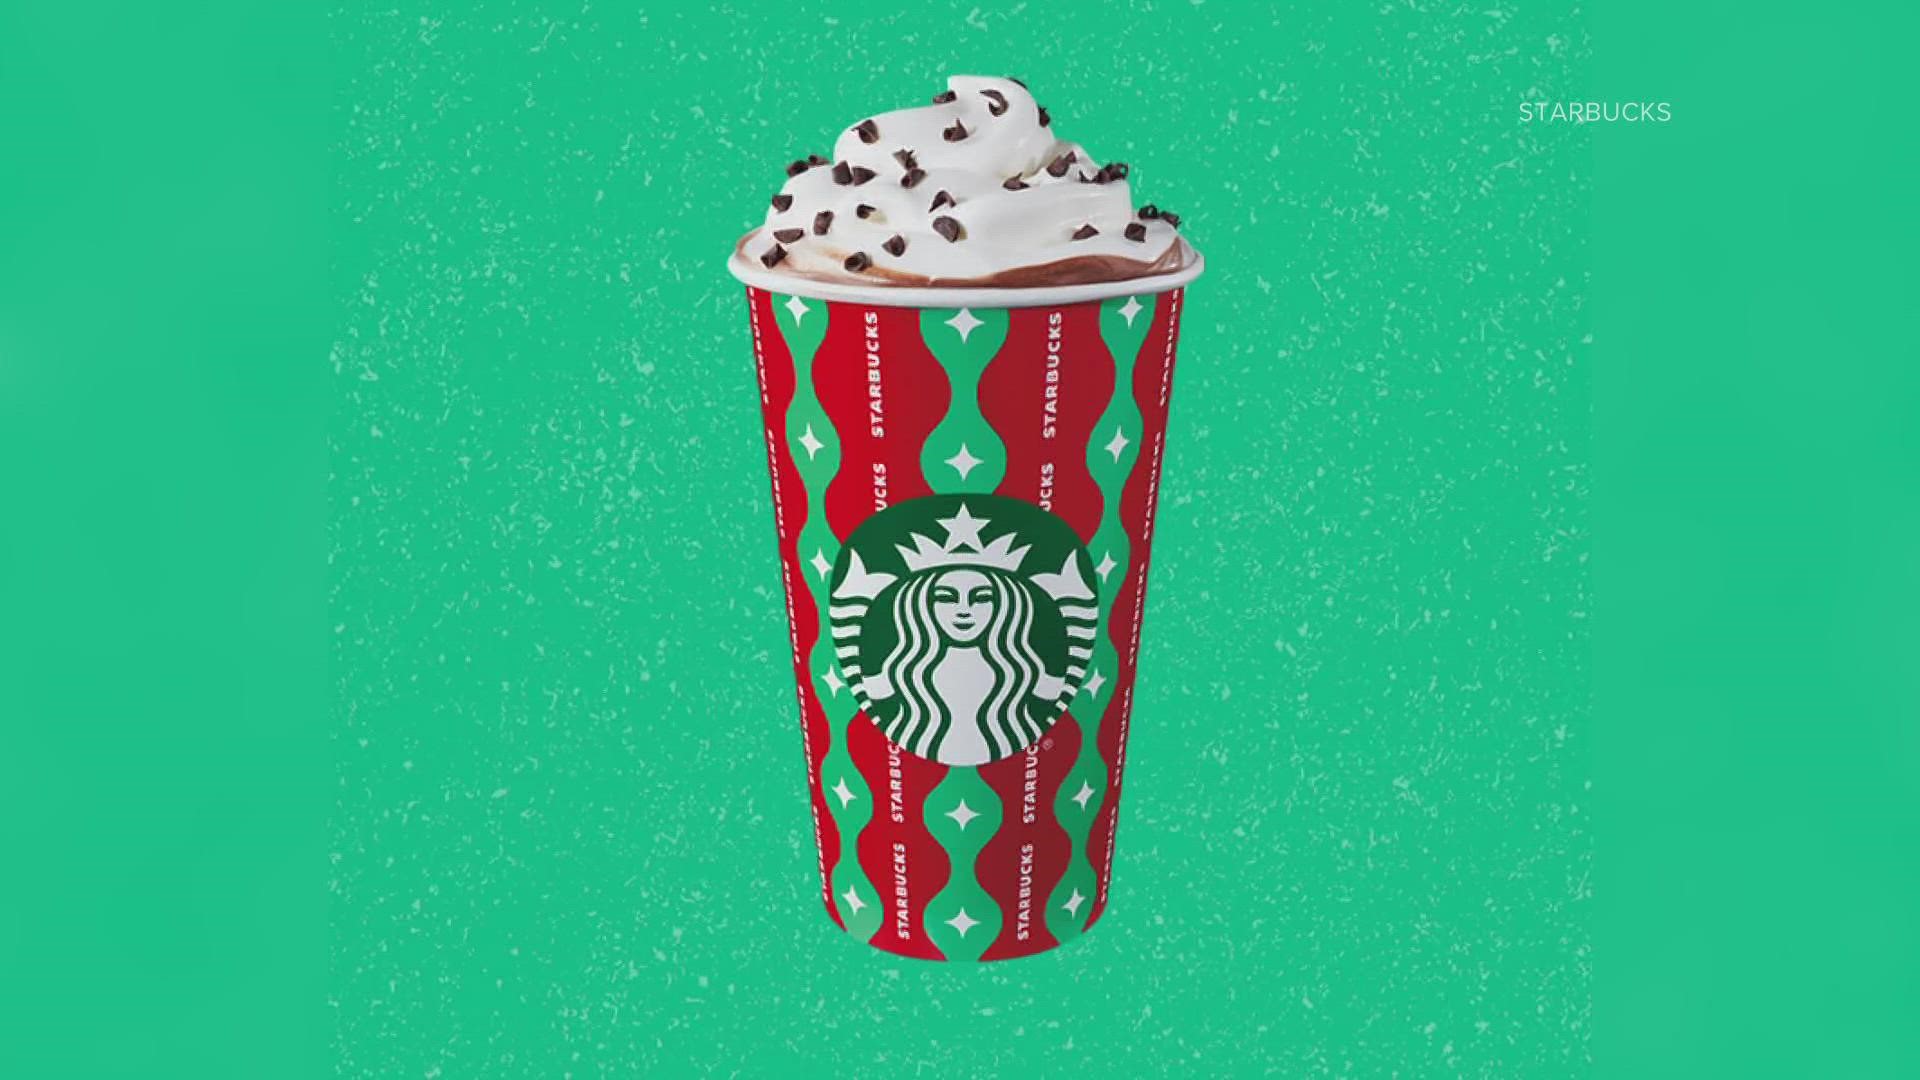 The coffee giant announced its iconic holiday cups and menu items will return to stores nationwide on Thursday, Nov. 3.